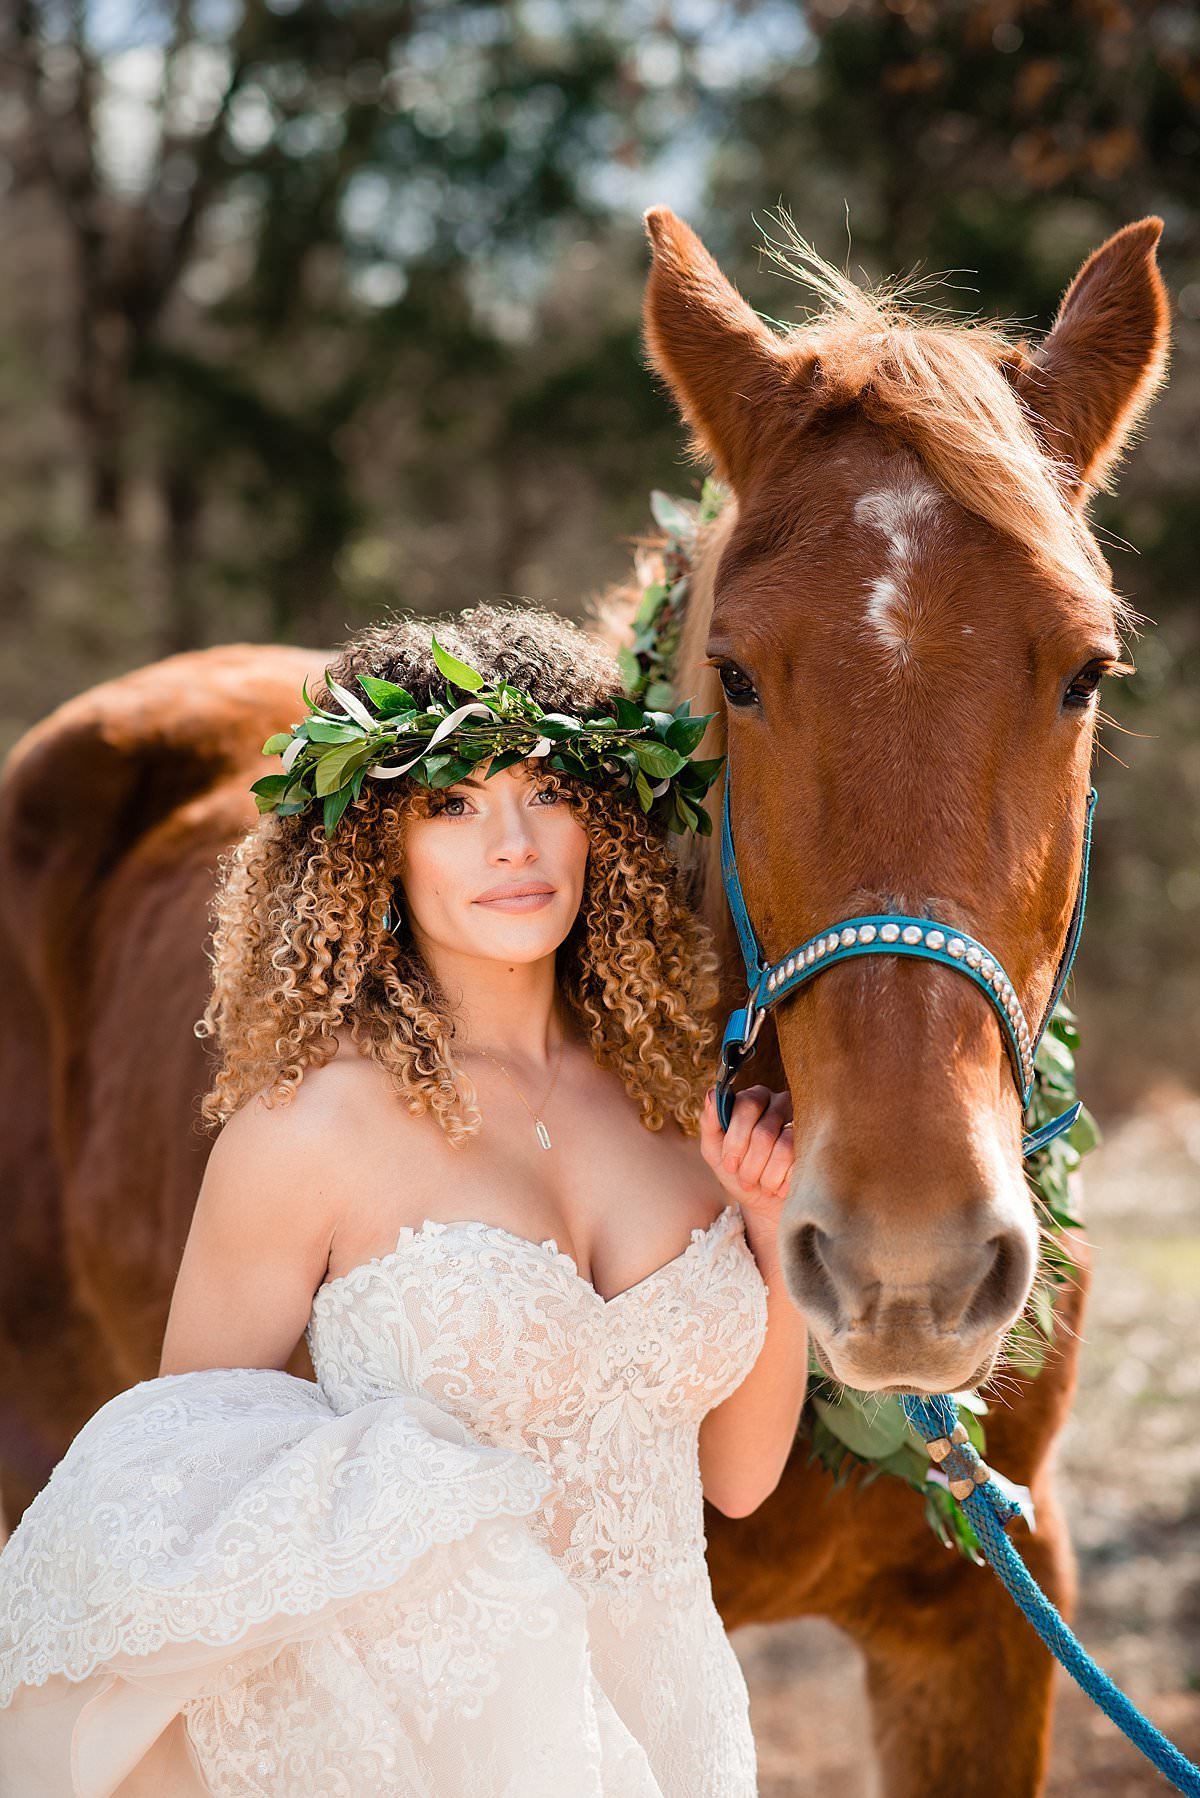 Bride wearing a lace sweetheart dress and greenery flower crown holding onto a beautiful brown horse